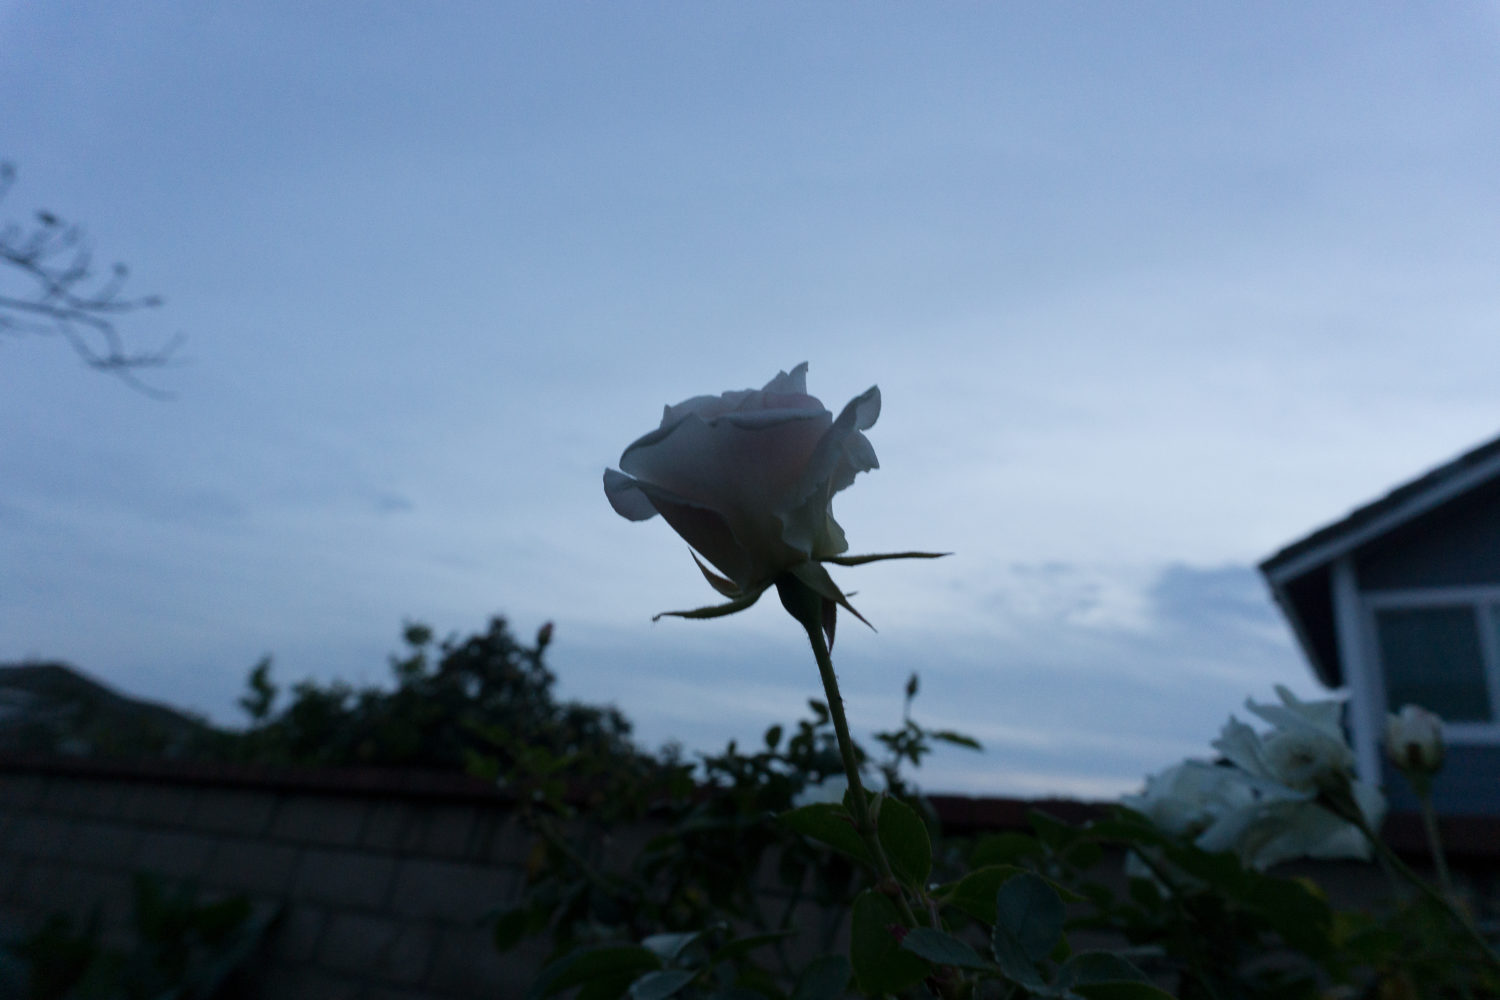 An image of a white rose in the sky with a darkly lit setting